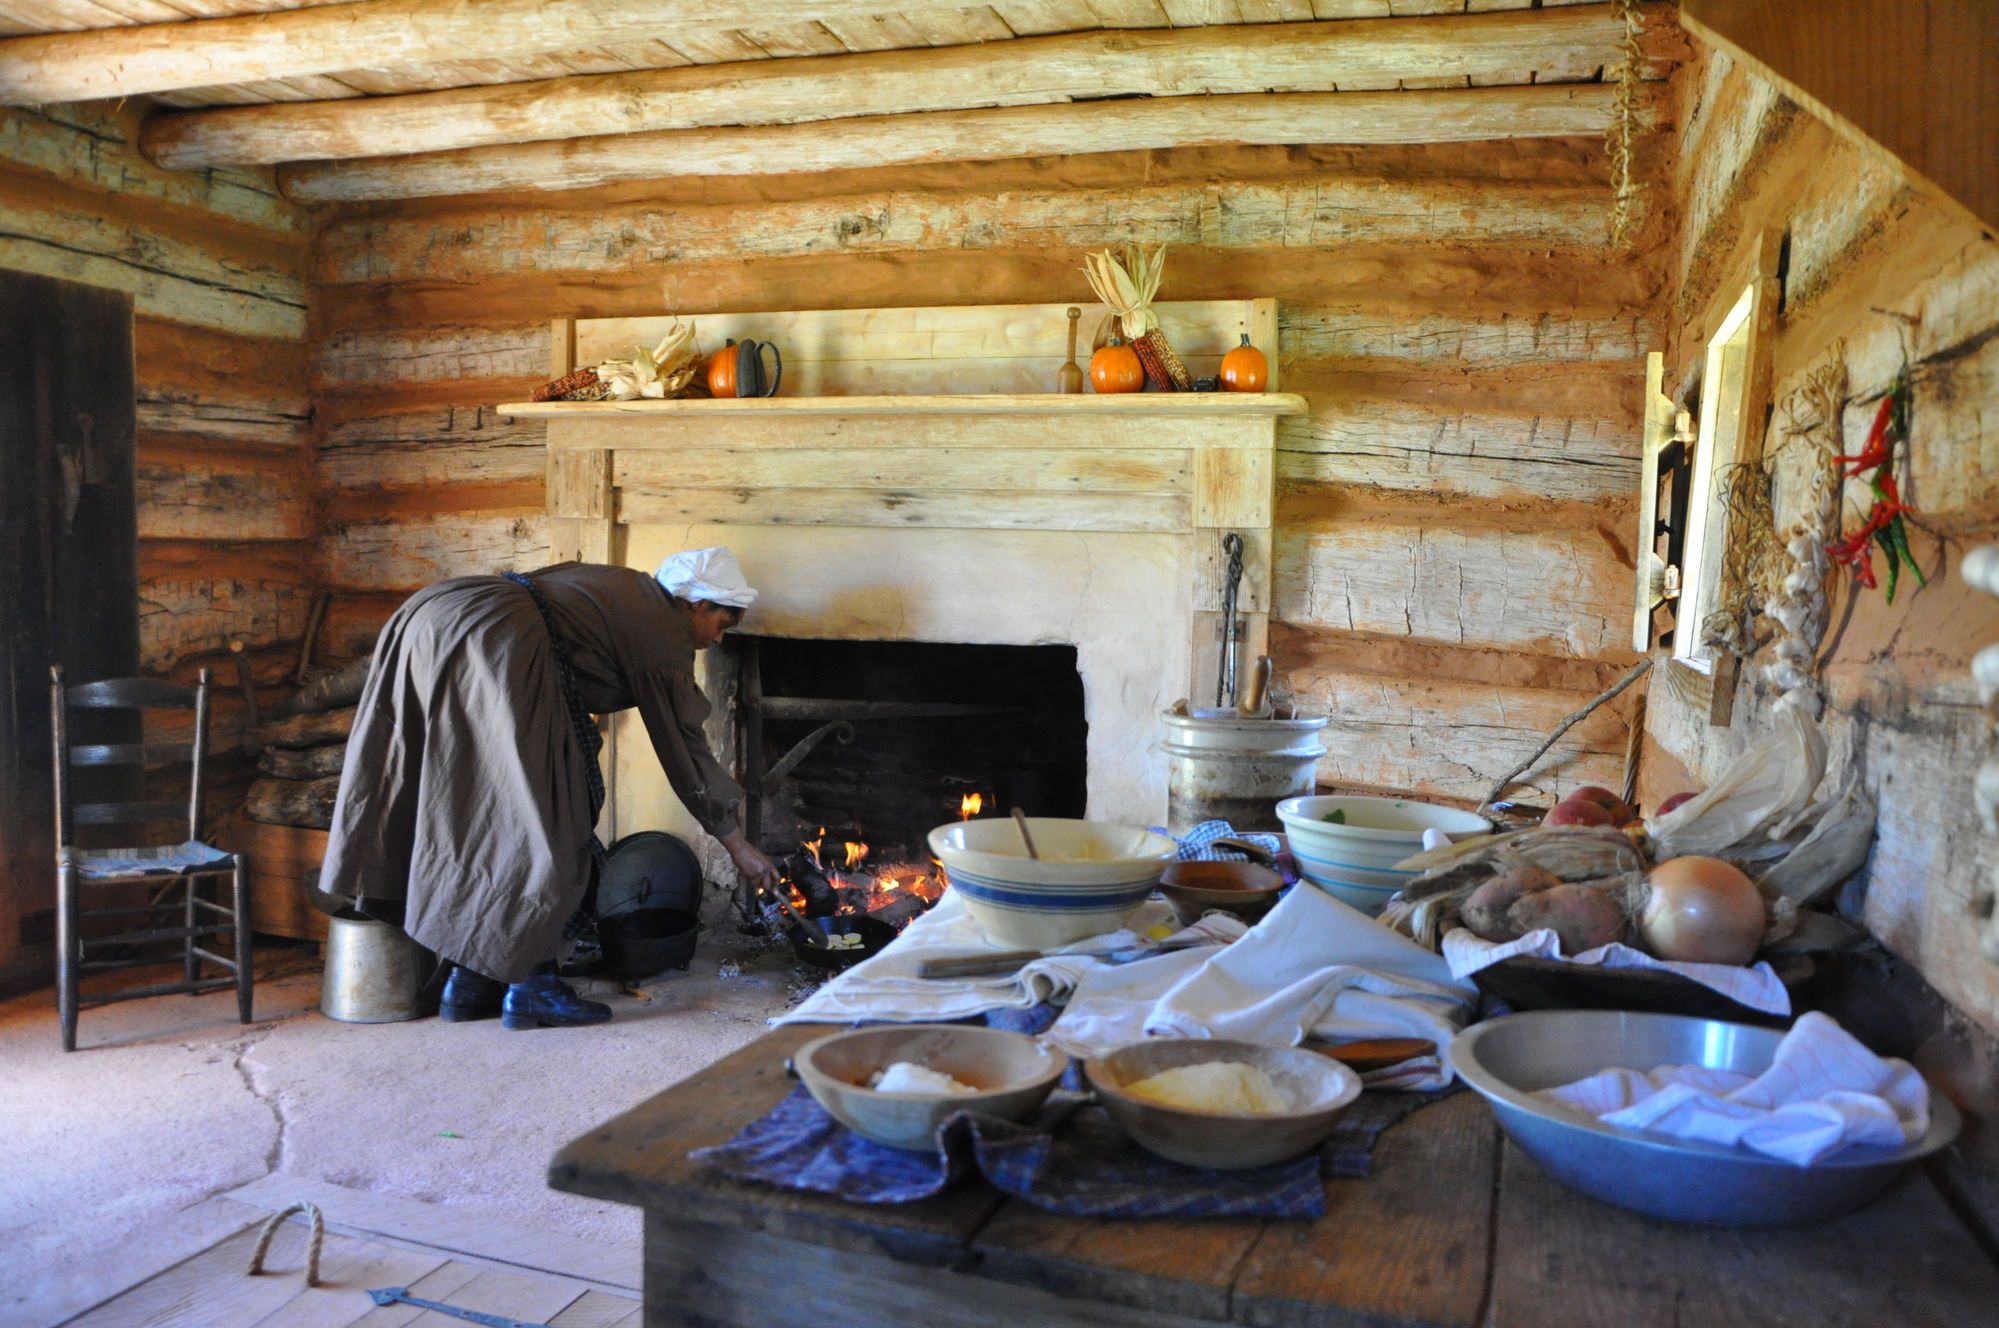 A woman in period clothing tends her fire in a log cabin